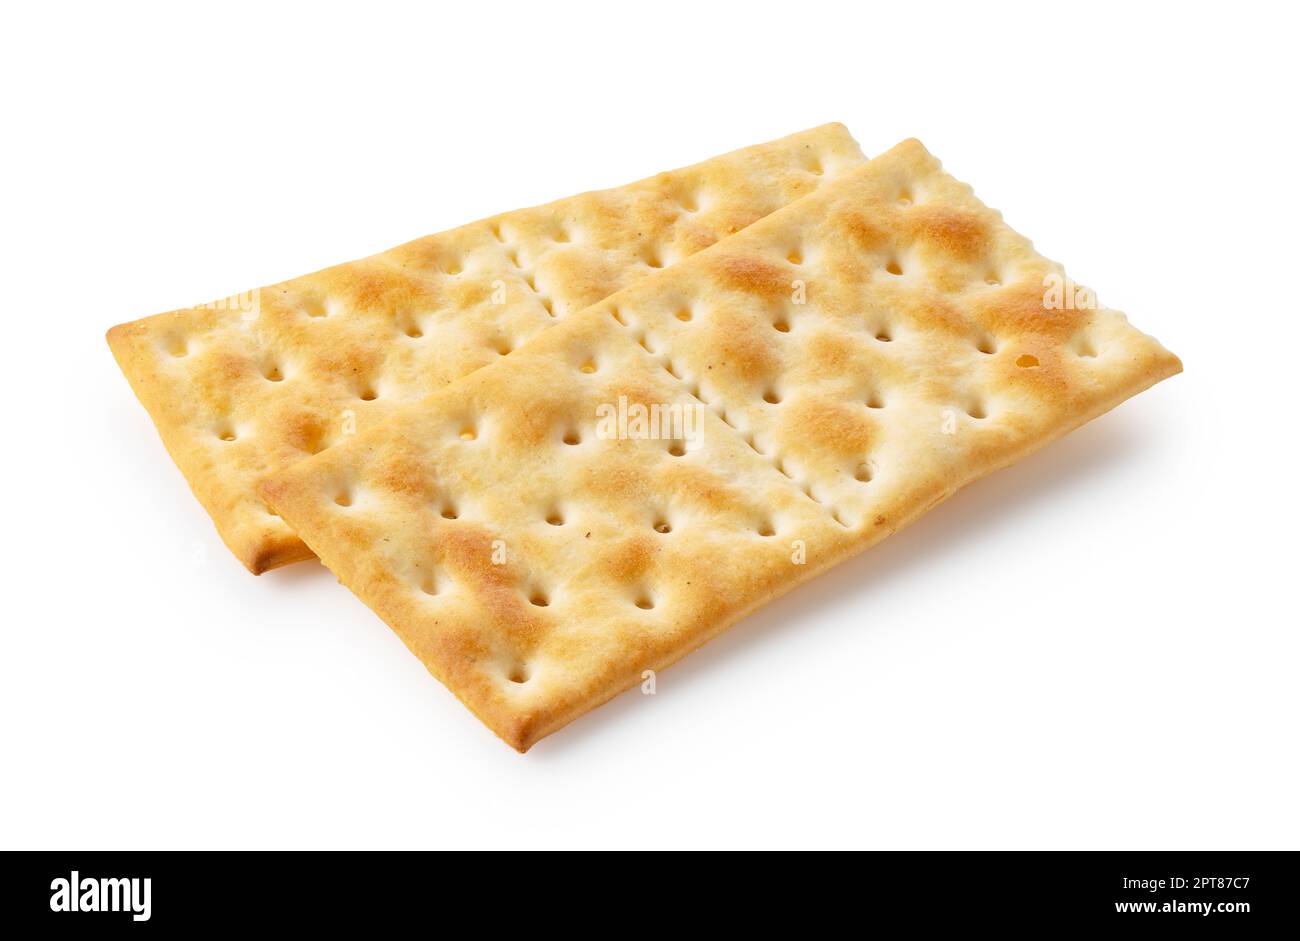 https://c8.alamy.com/comp/2PT87C7/crackers-placed-on-top-of-each-other-on-a-white-background-2PT87C7.jpg